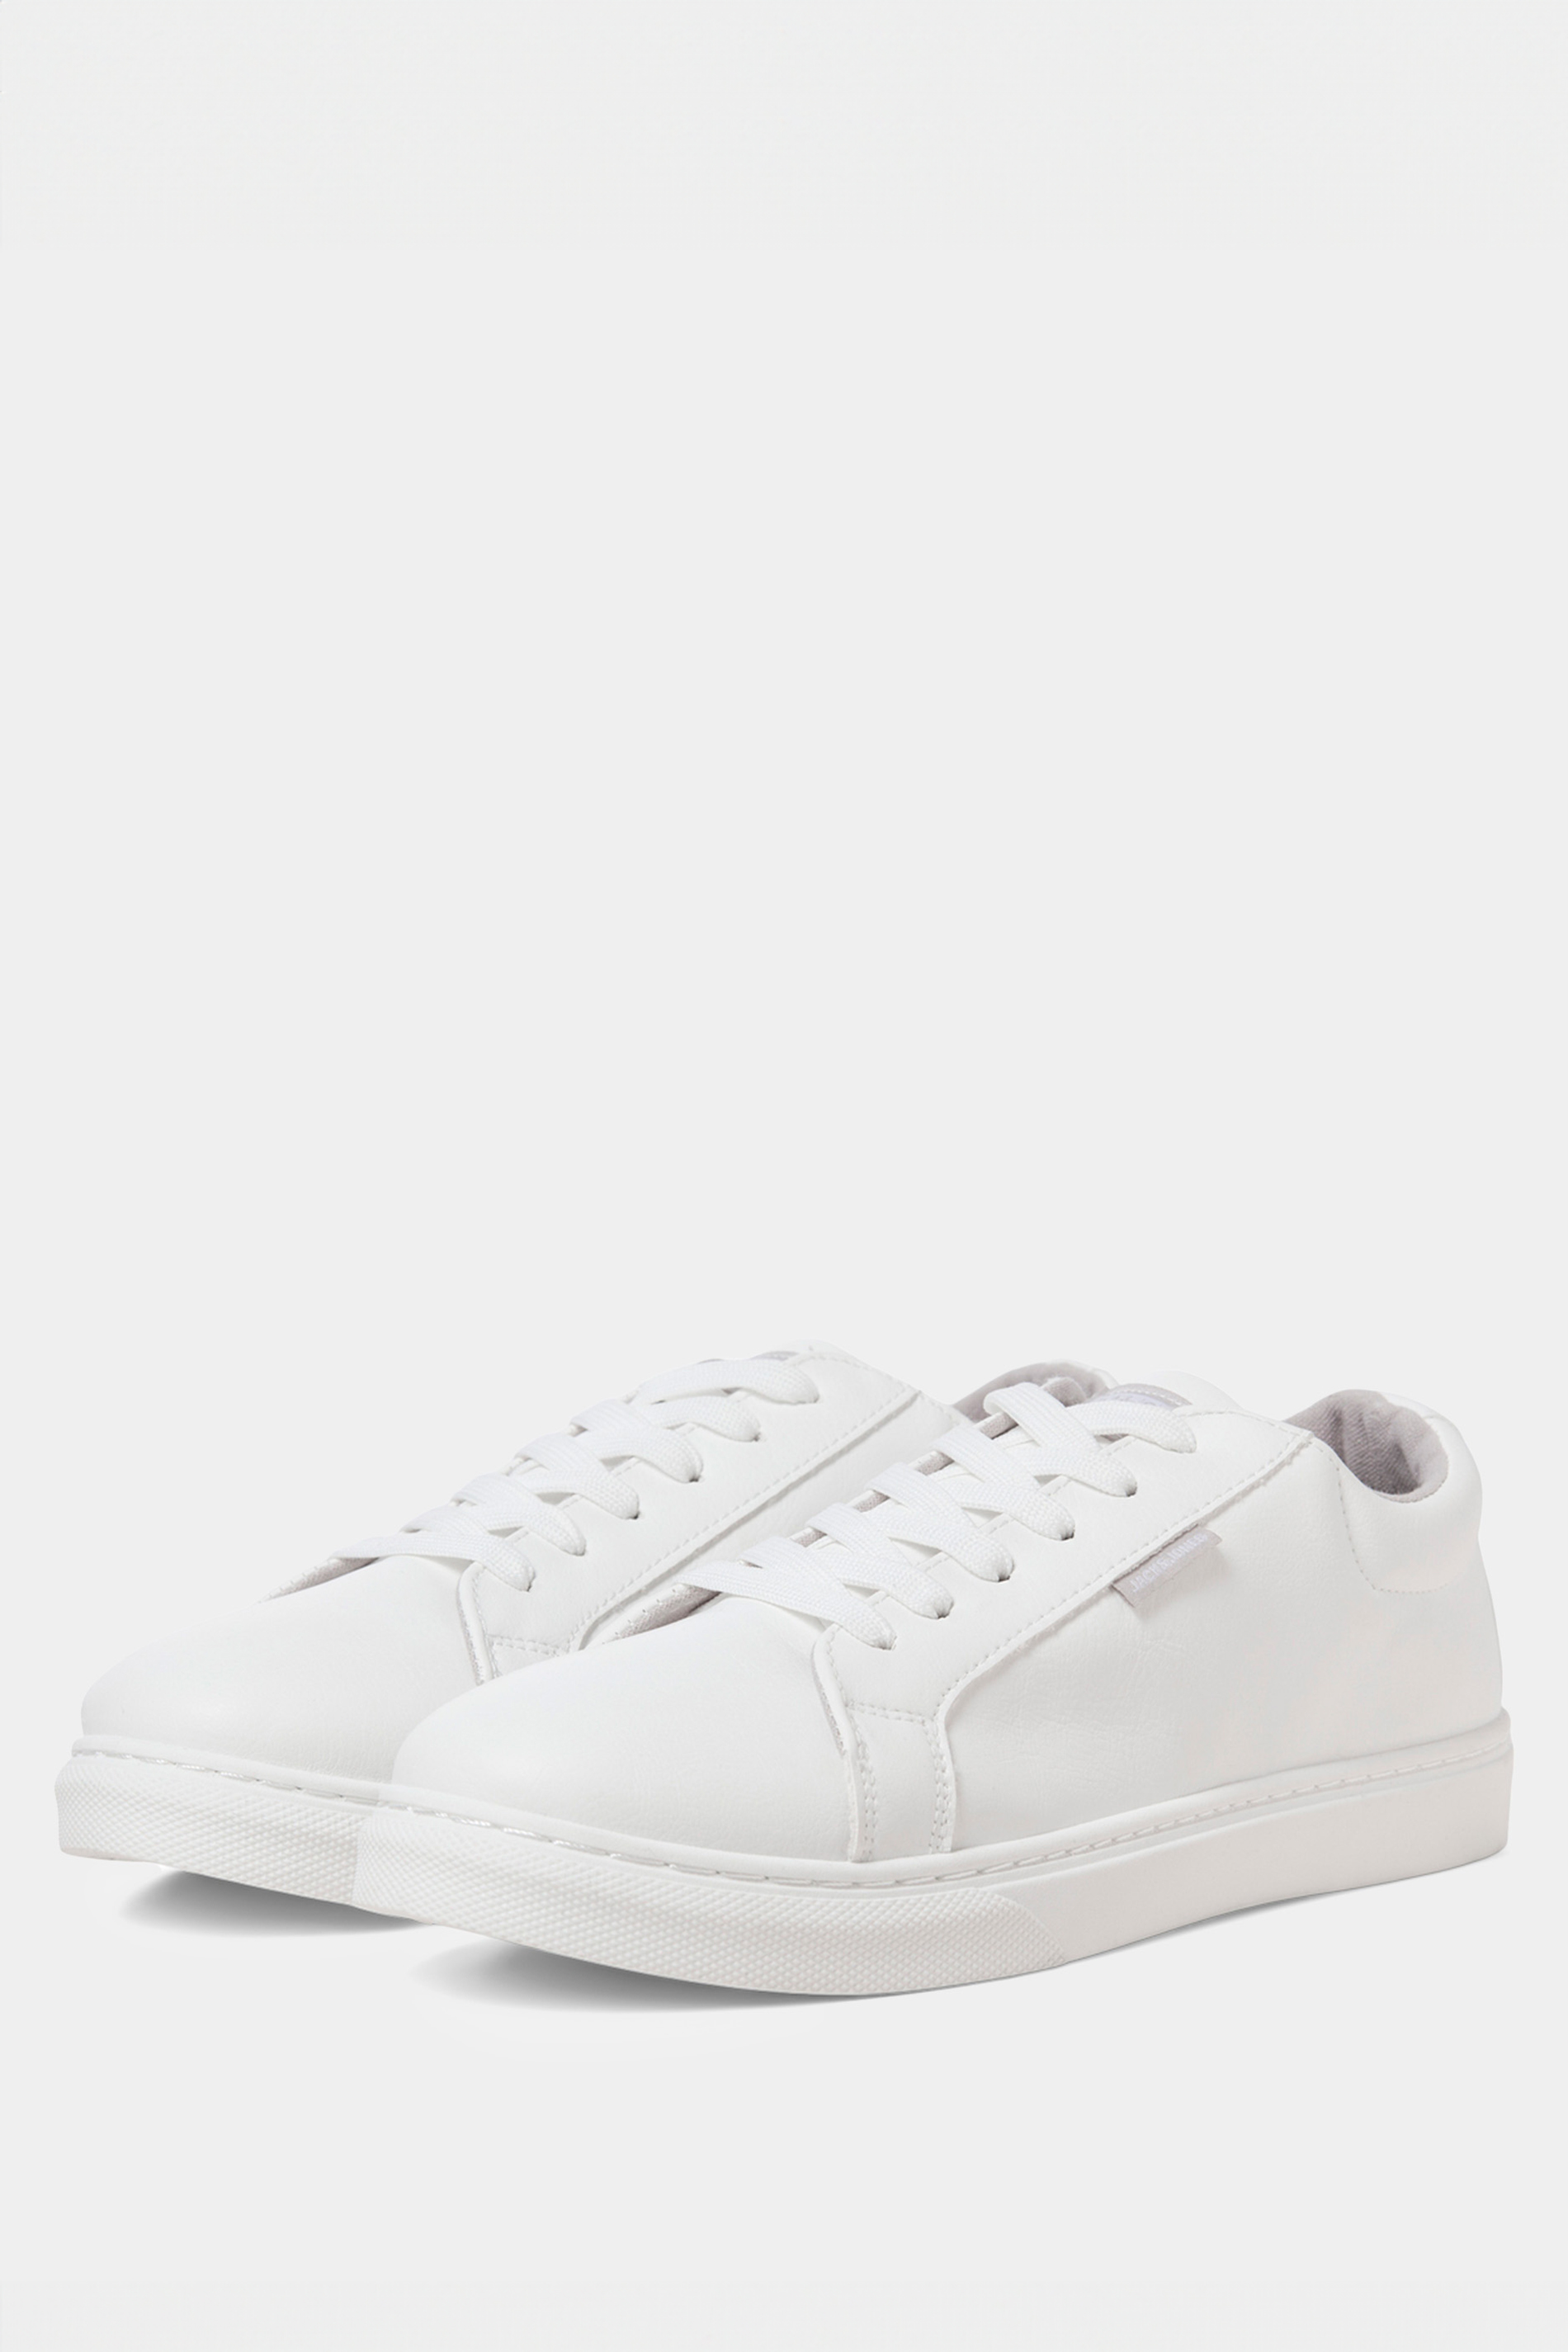 JACK & JONES White Anthracite Faux Leather Trainers | BadRhino 1